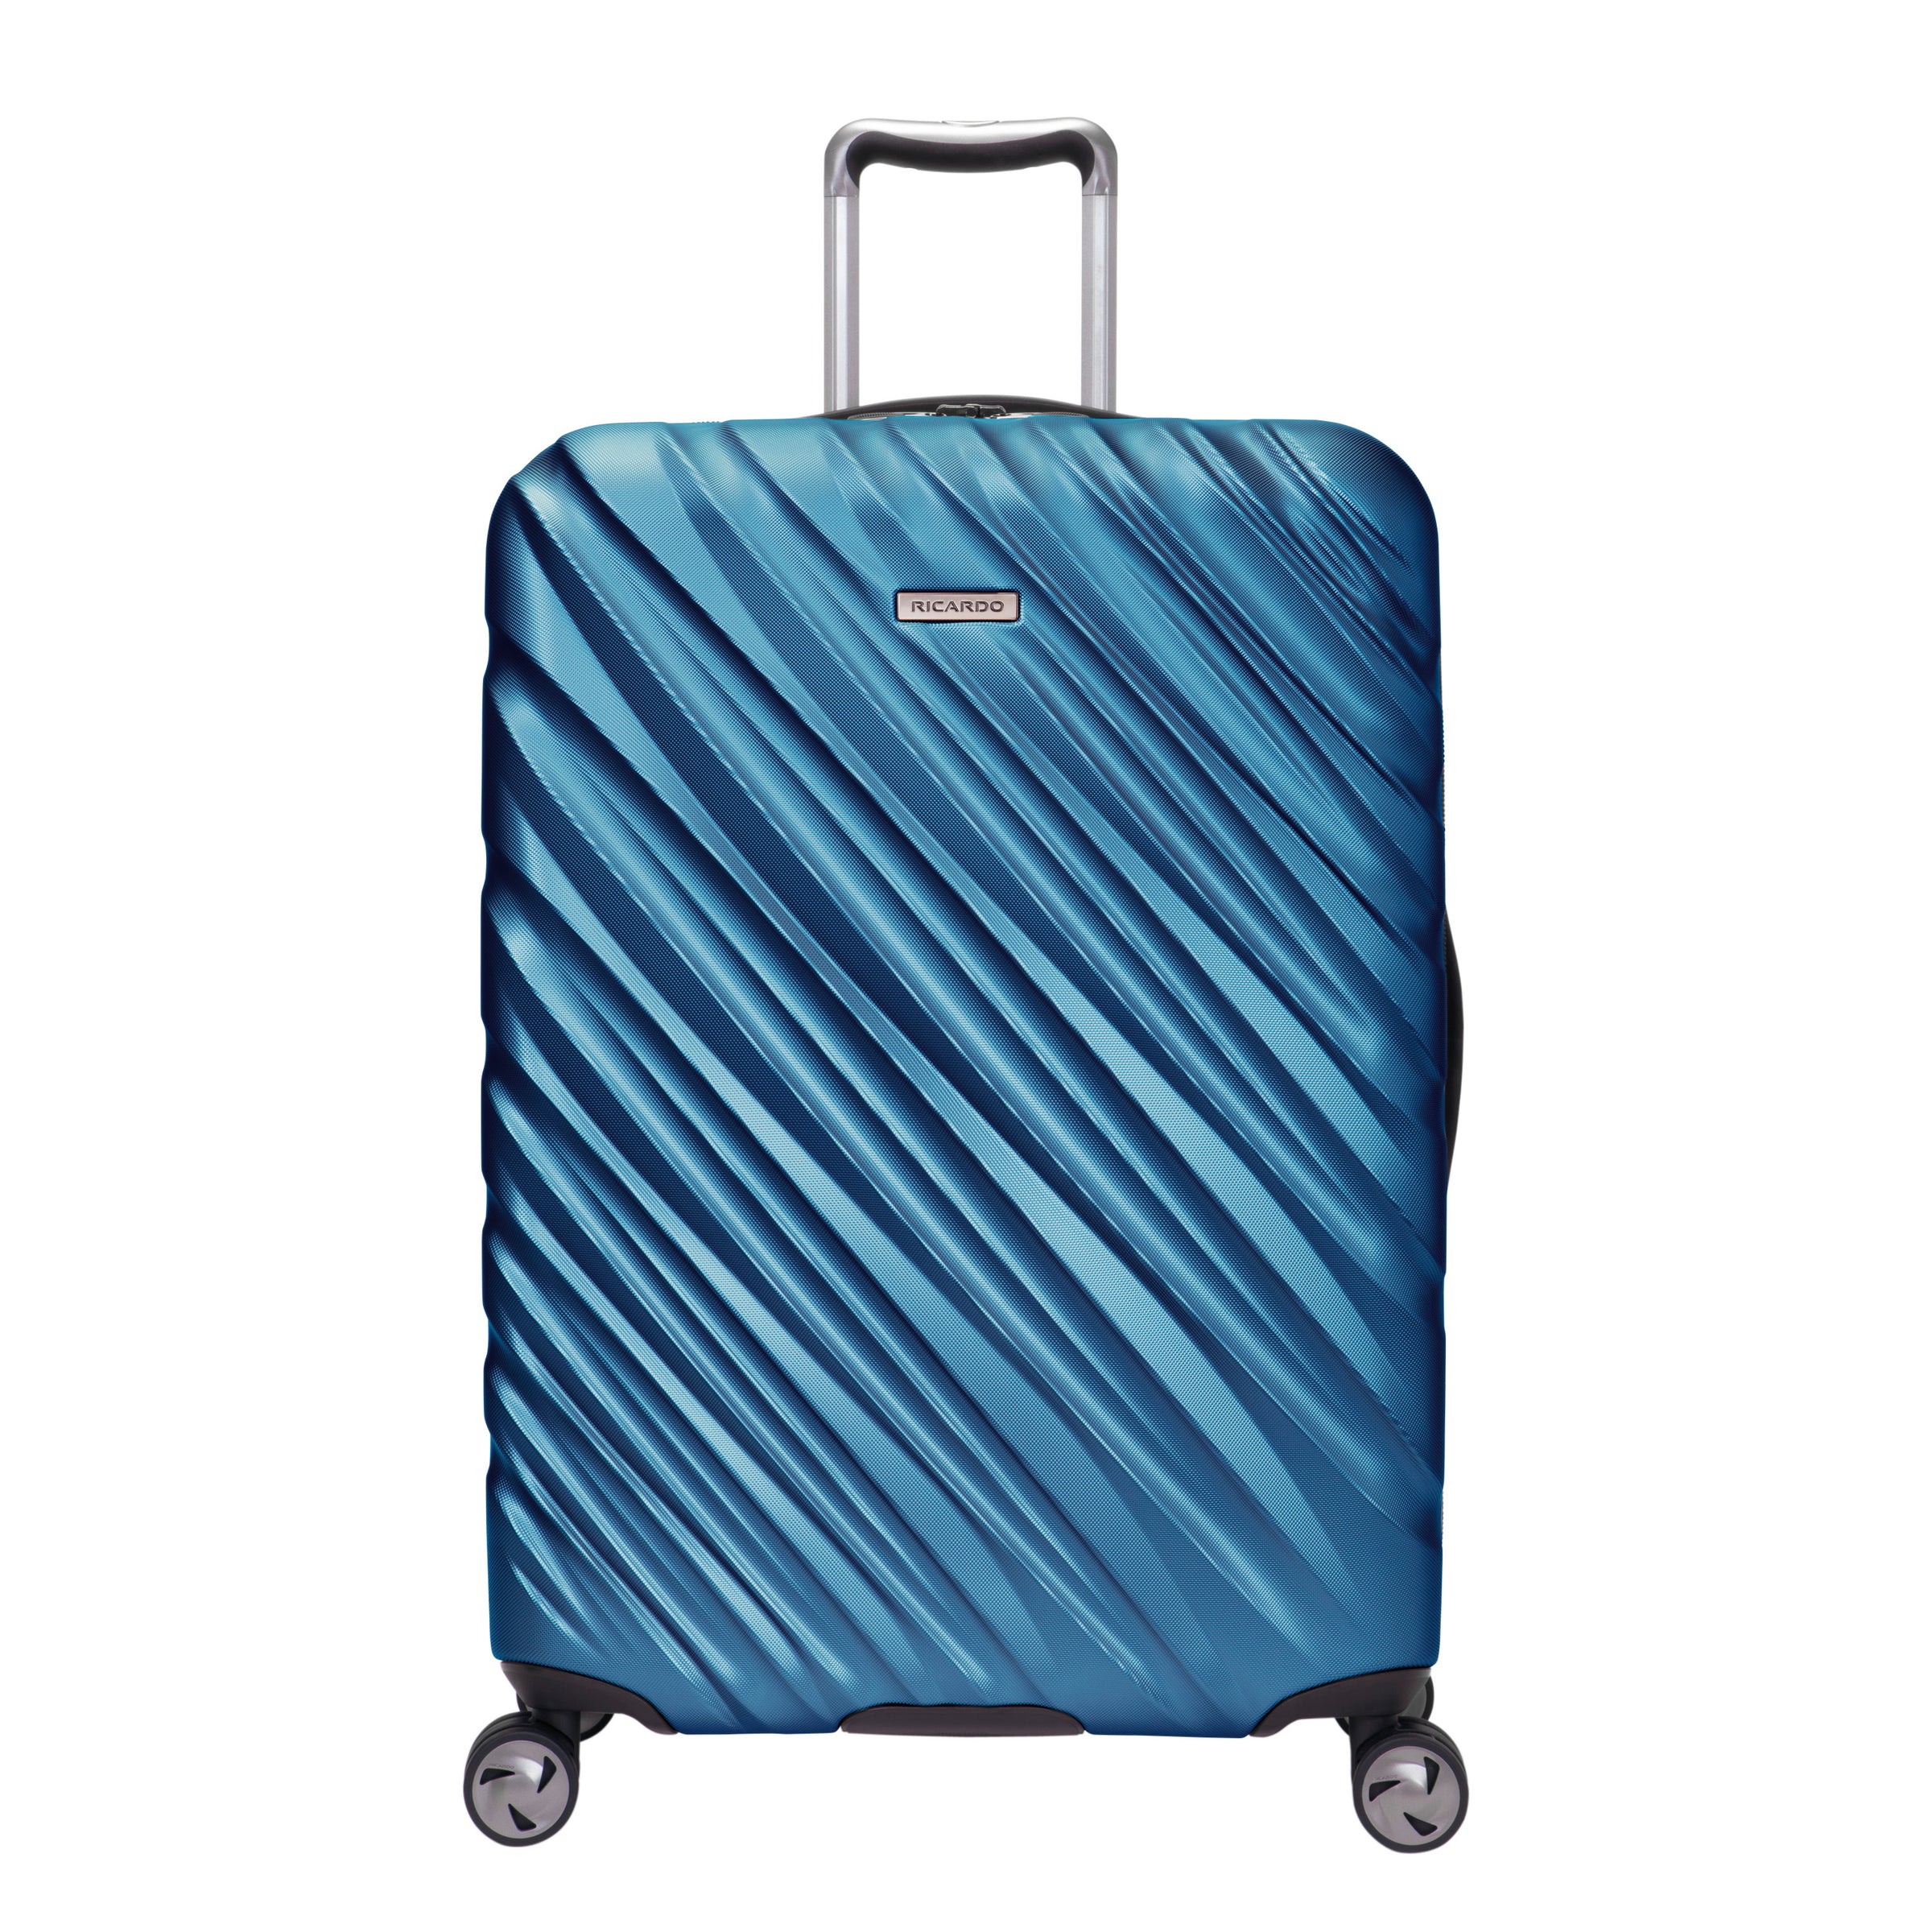 Mojave hardside luggage with textured diagonal grooves shown in Twilight Blue